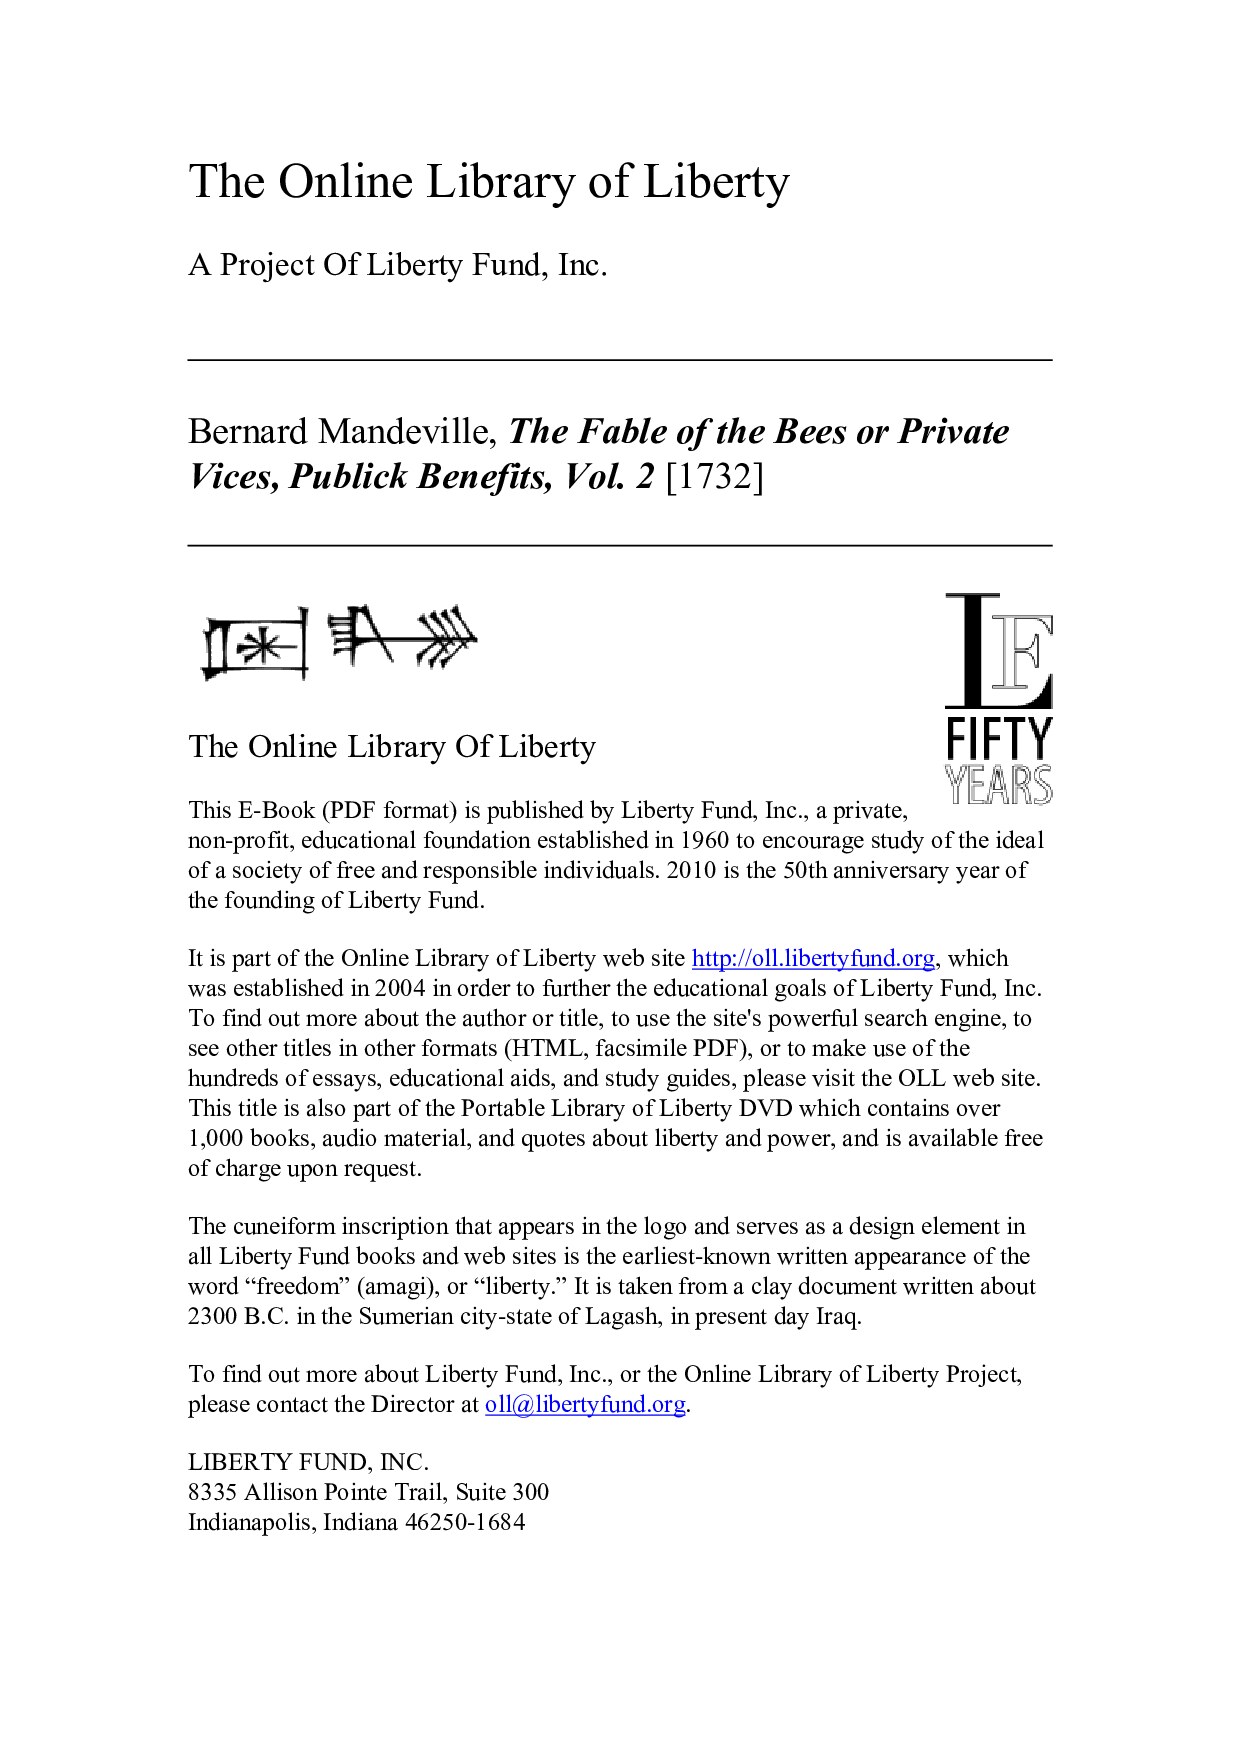 Online Library of Liberty: The Fable of the Bees or Private Vices, Publick Benefits, Vol. 2 - Portable Library of Liberty